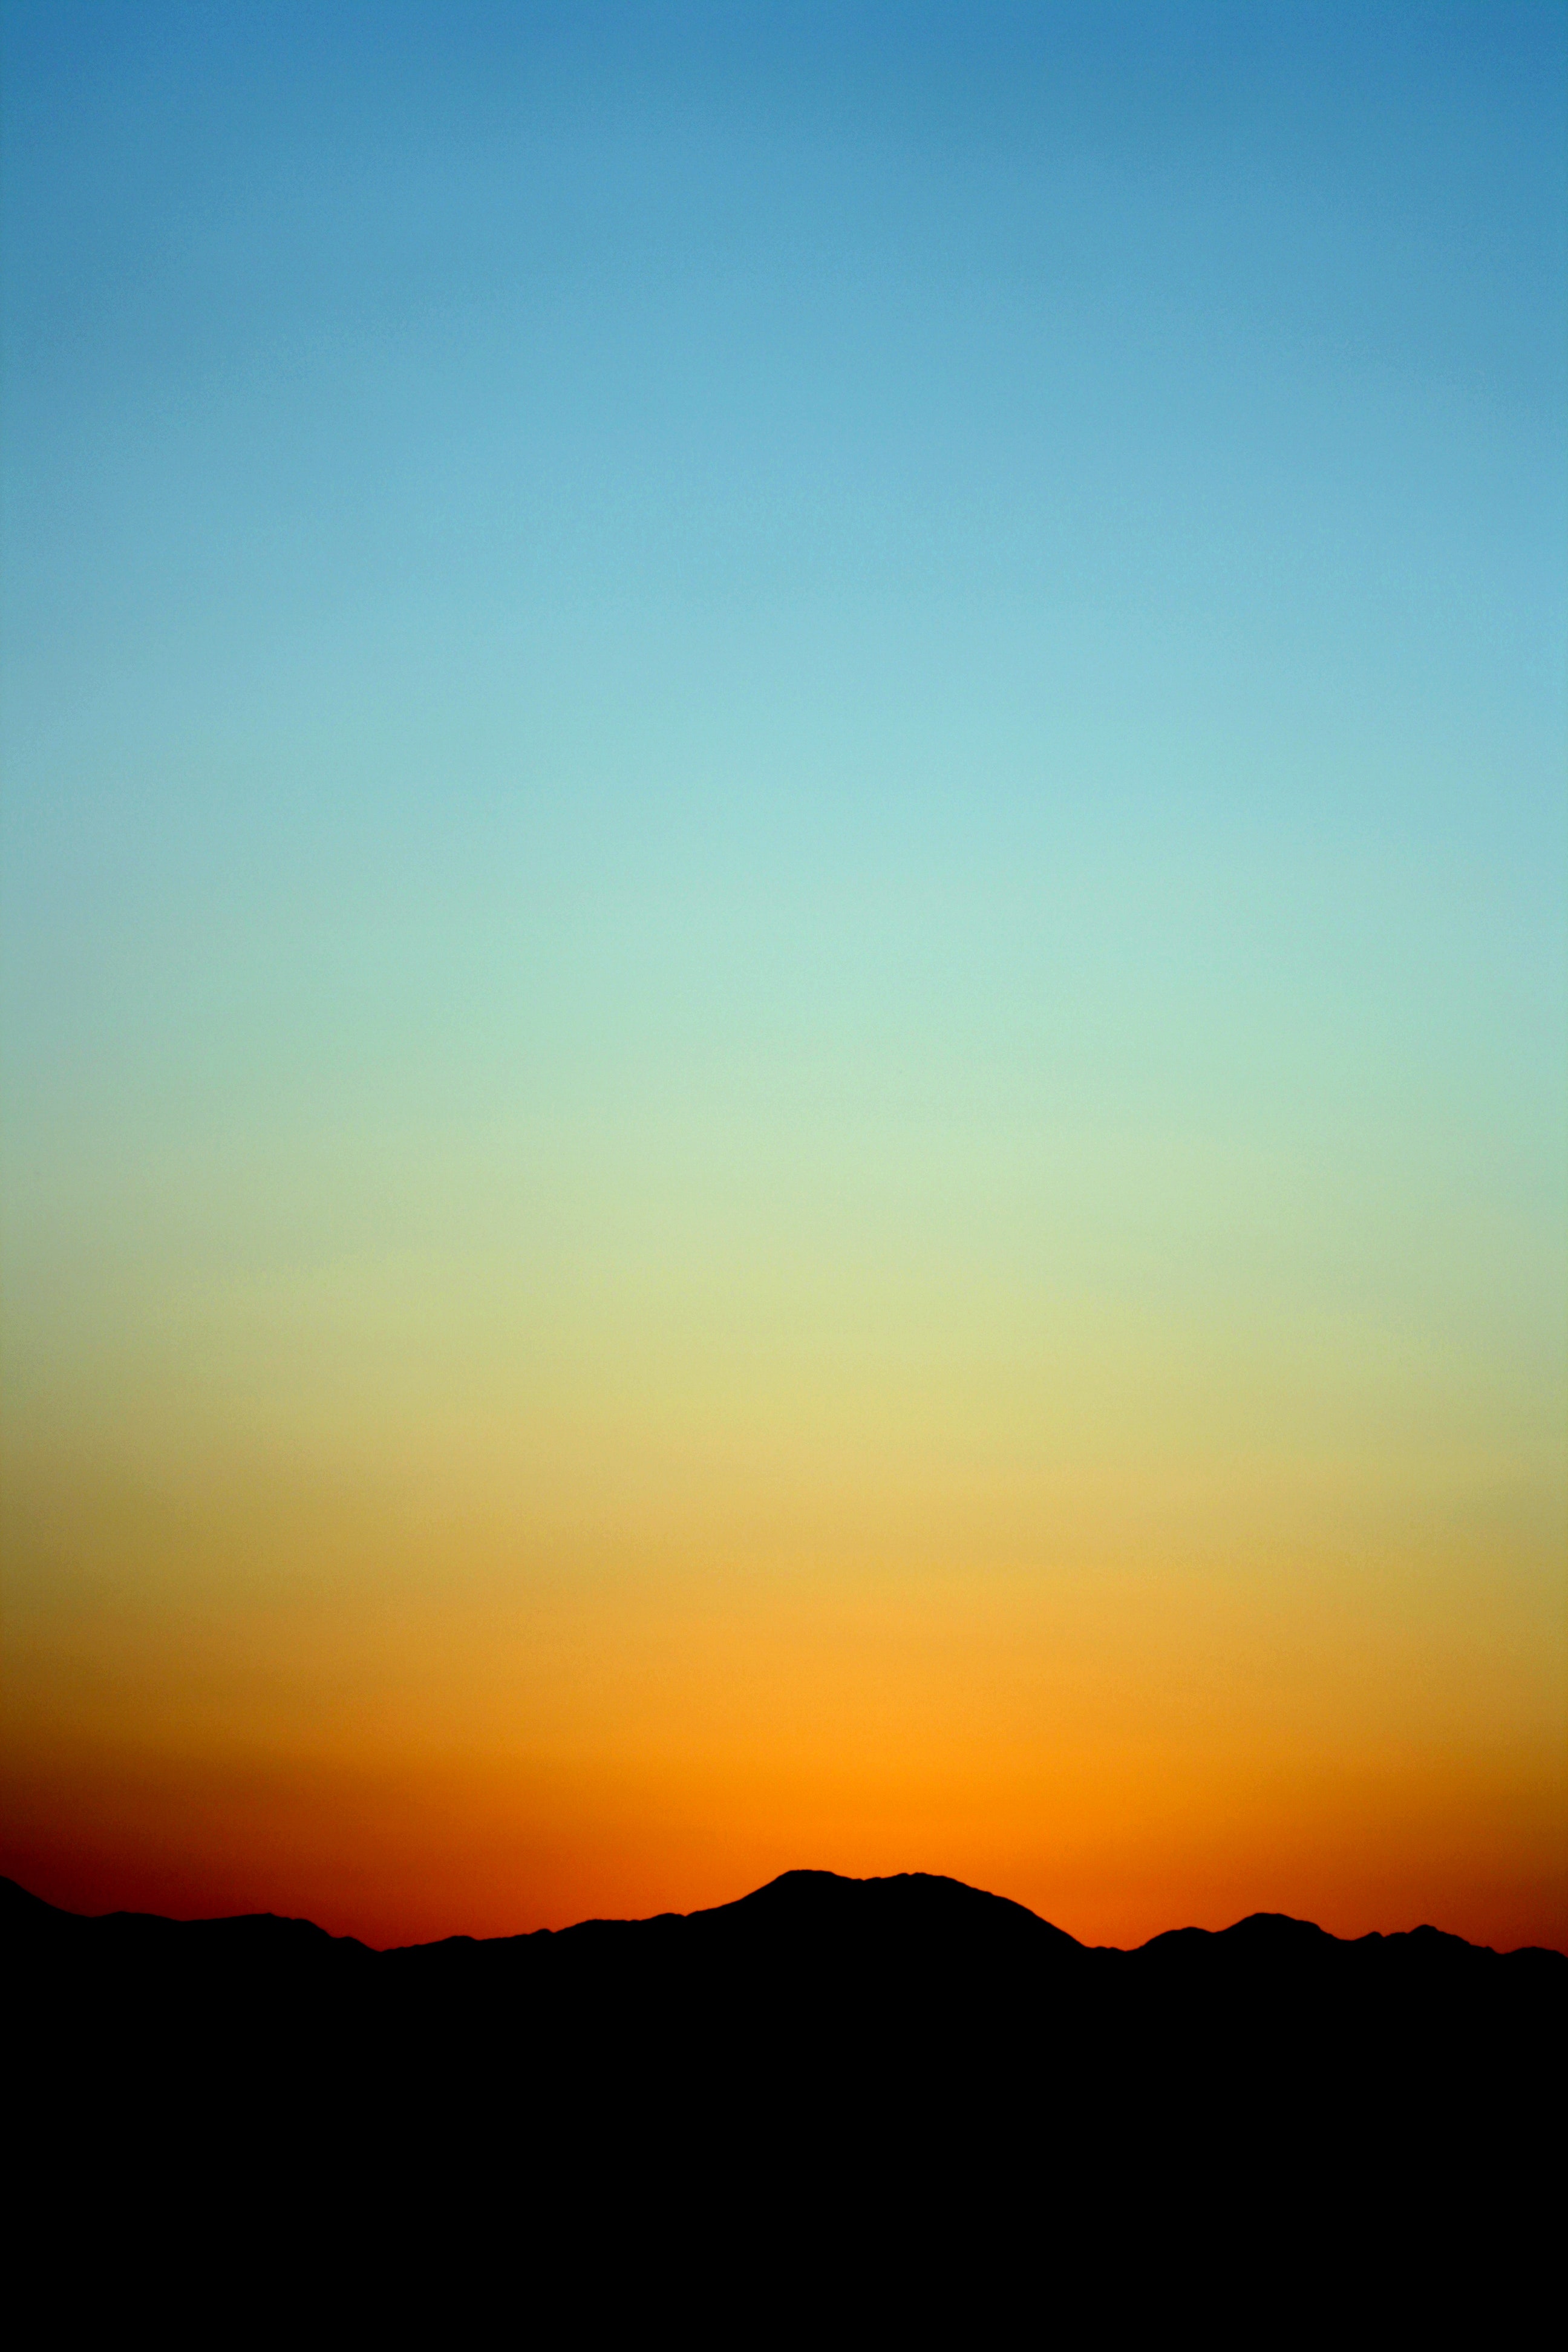 Silhouette of mountain under orange and blue sky during sunset photo